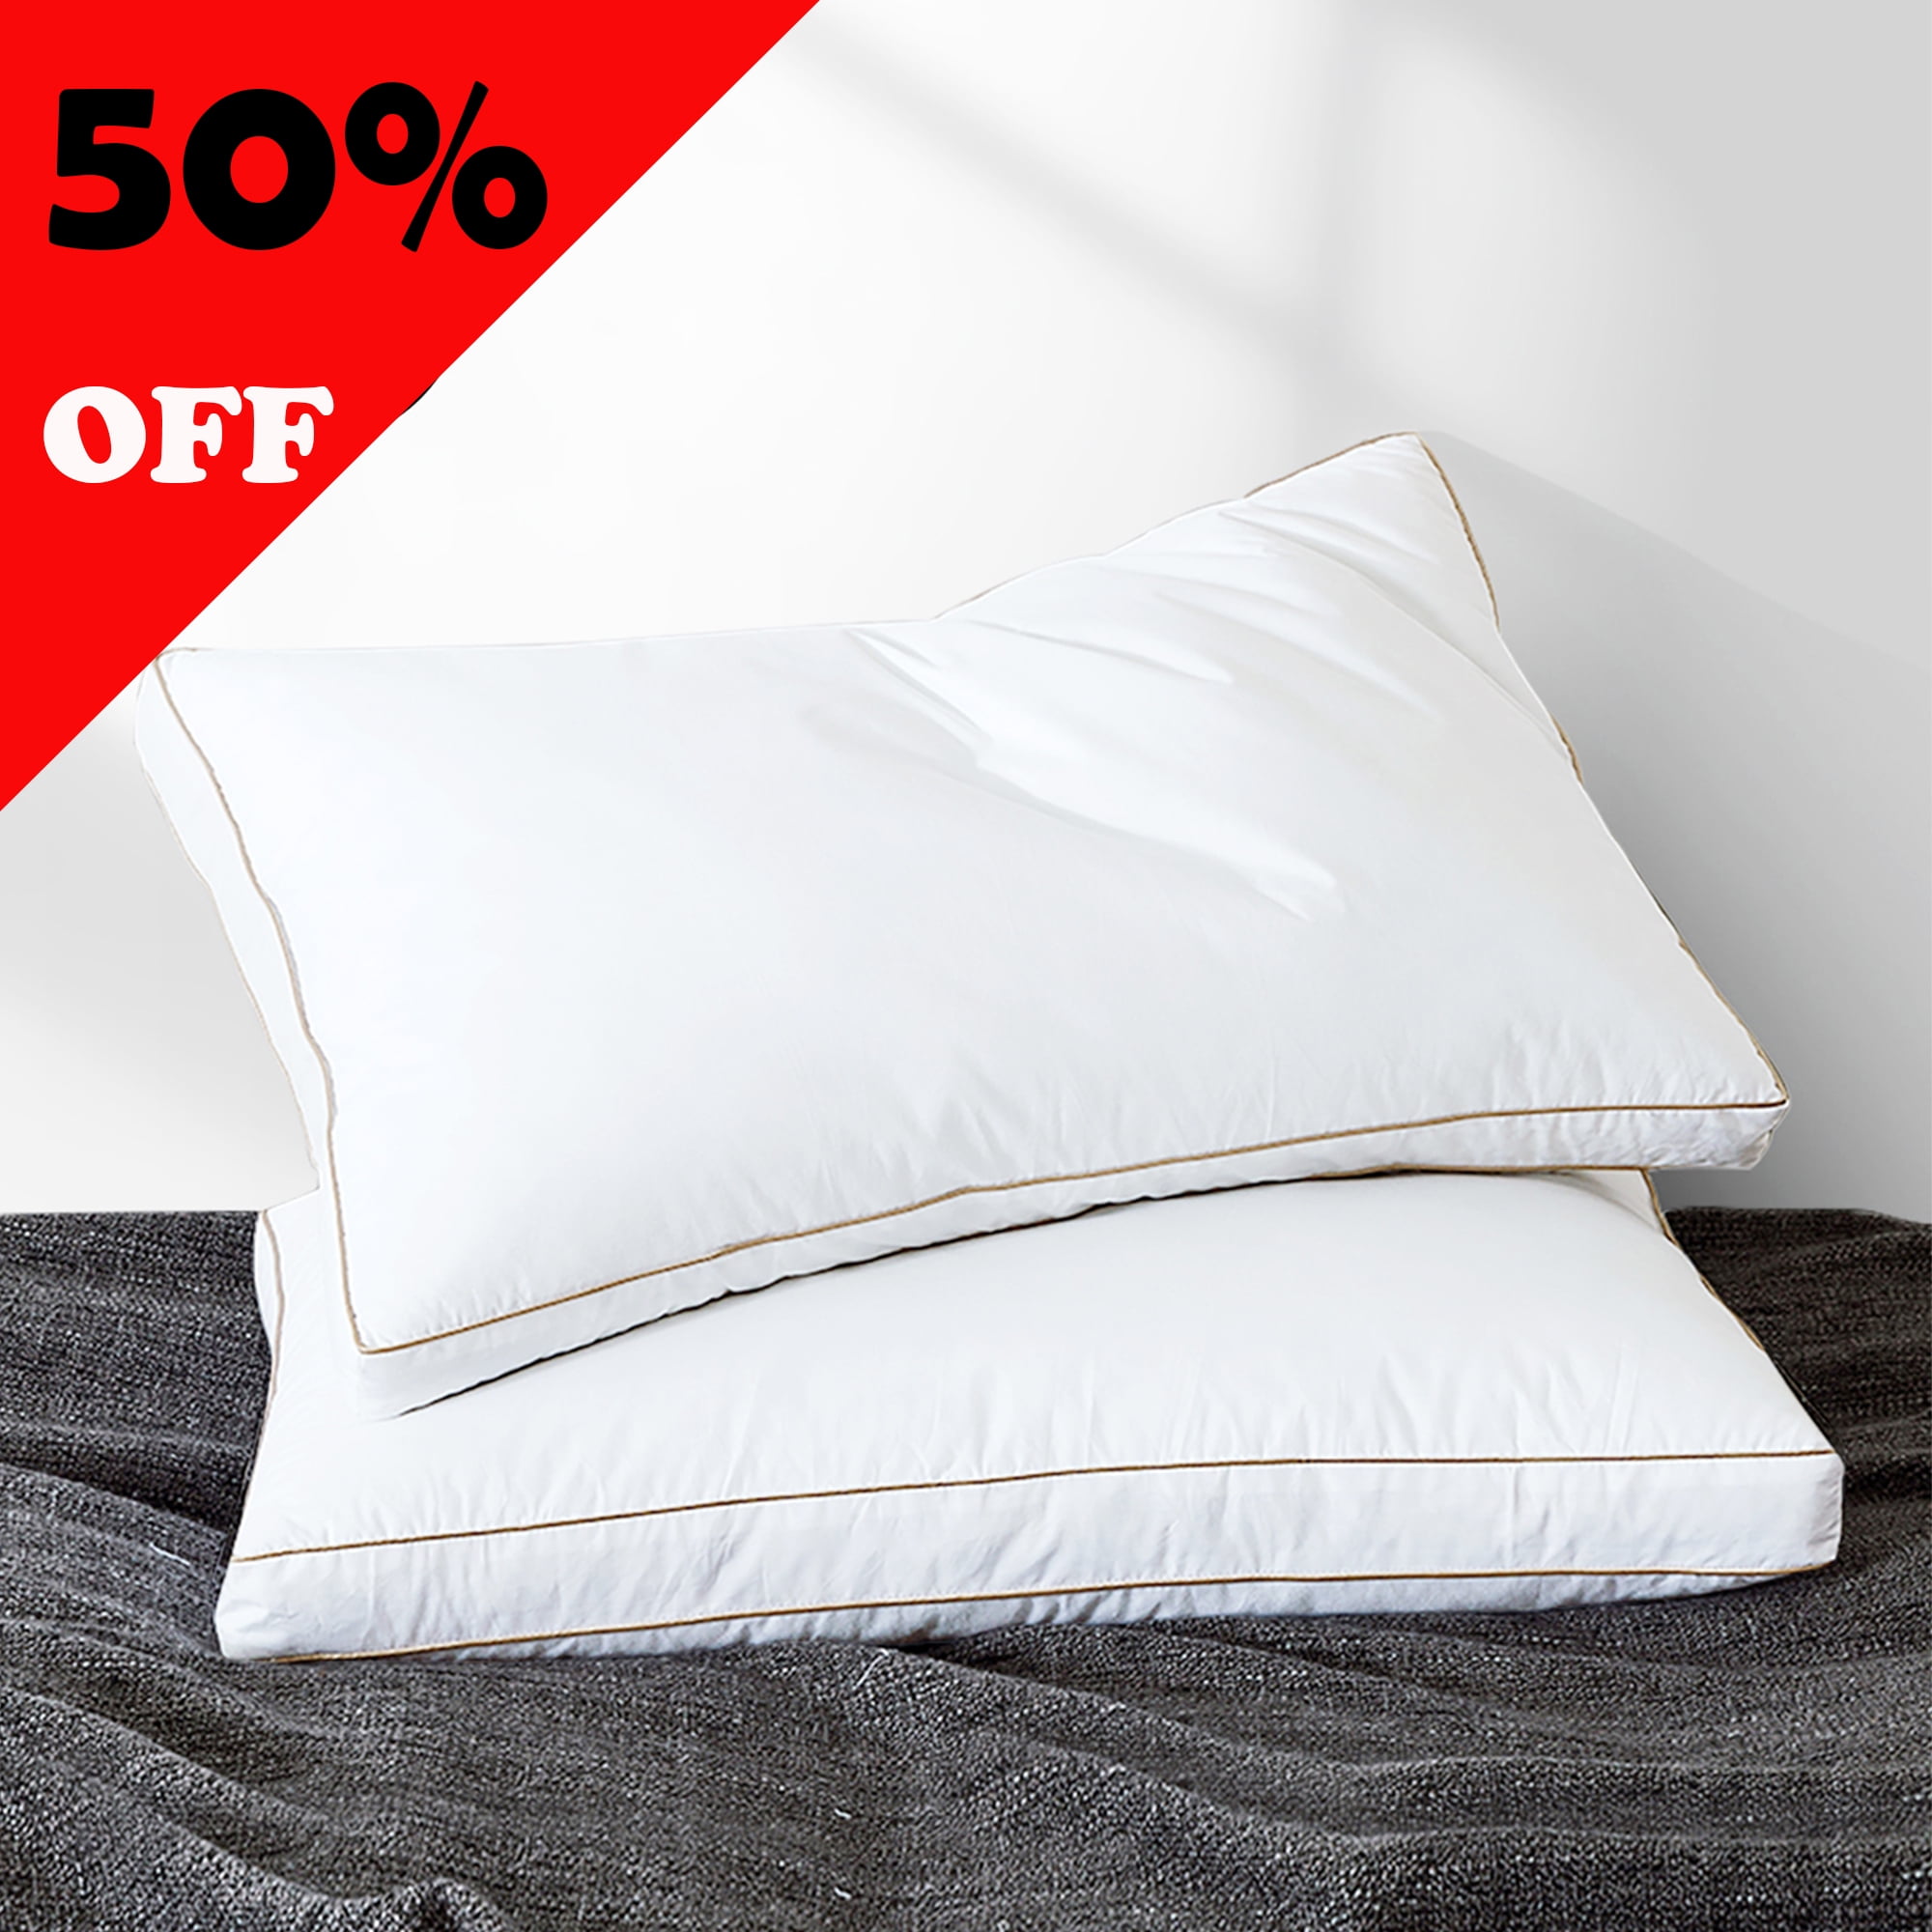  Sobel Westex: Hotel Sobella Bed Pillow for Sleeping, Side  Sleeper Pillow, Hotel Quality, 300 TC, 100% Cotton Case